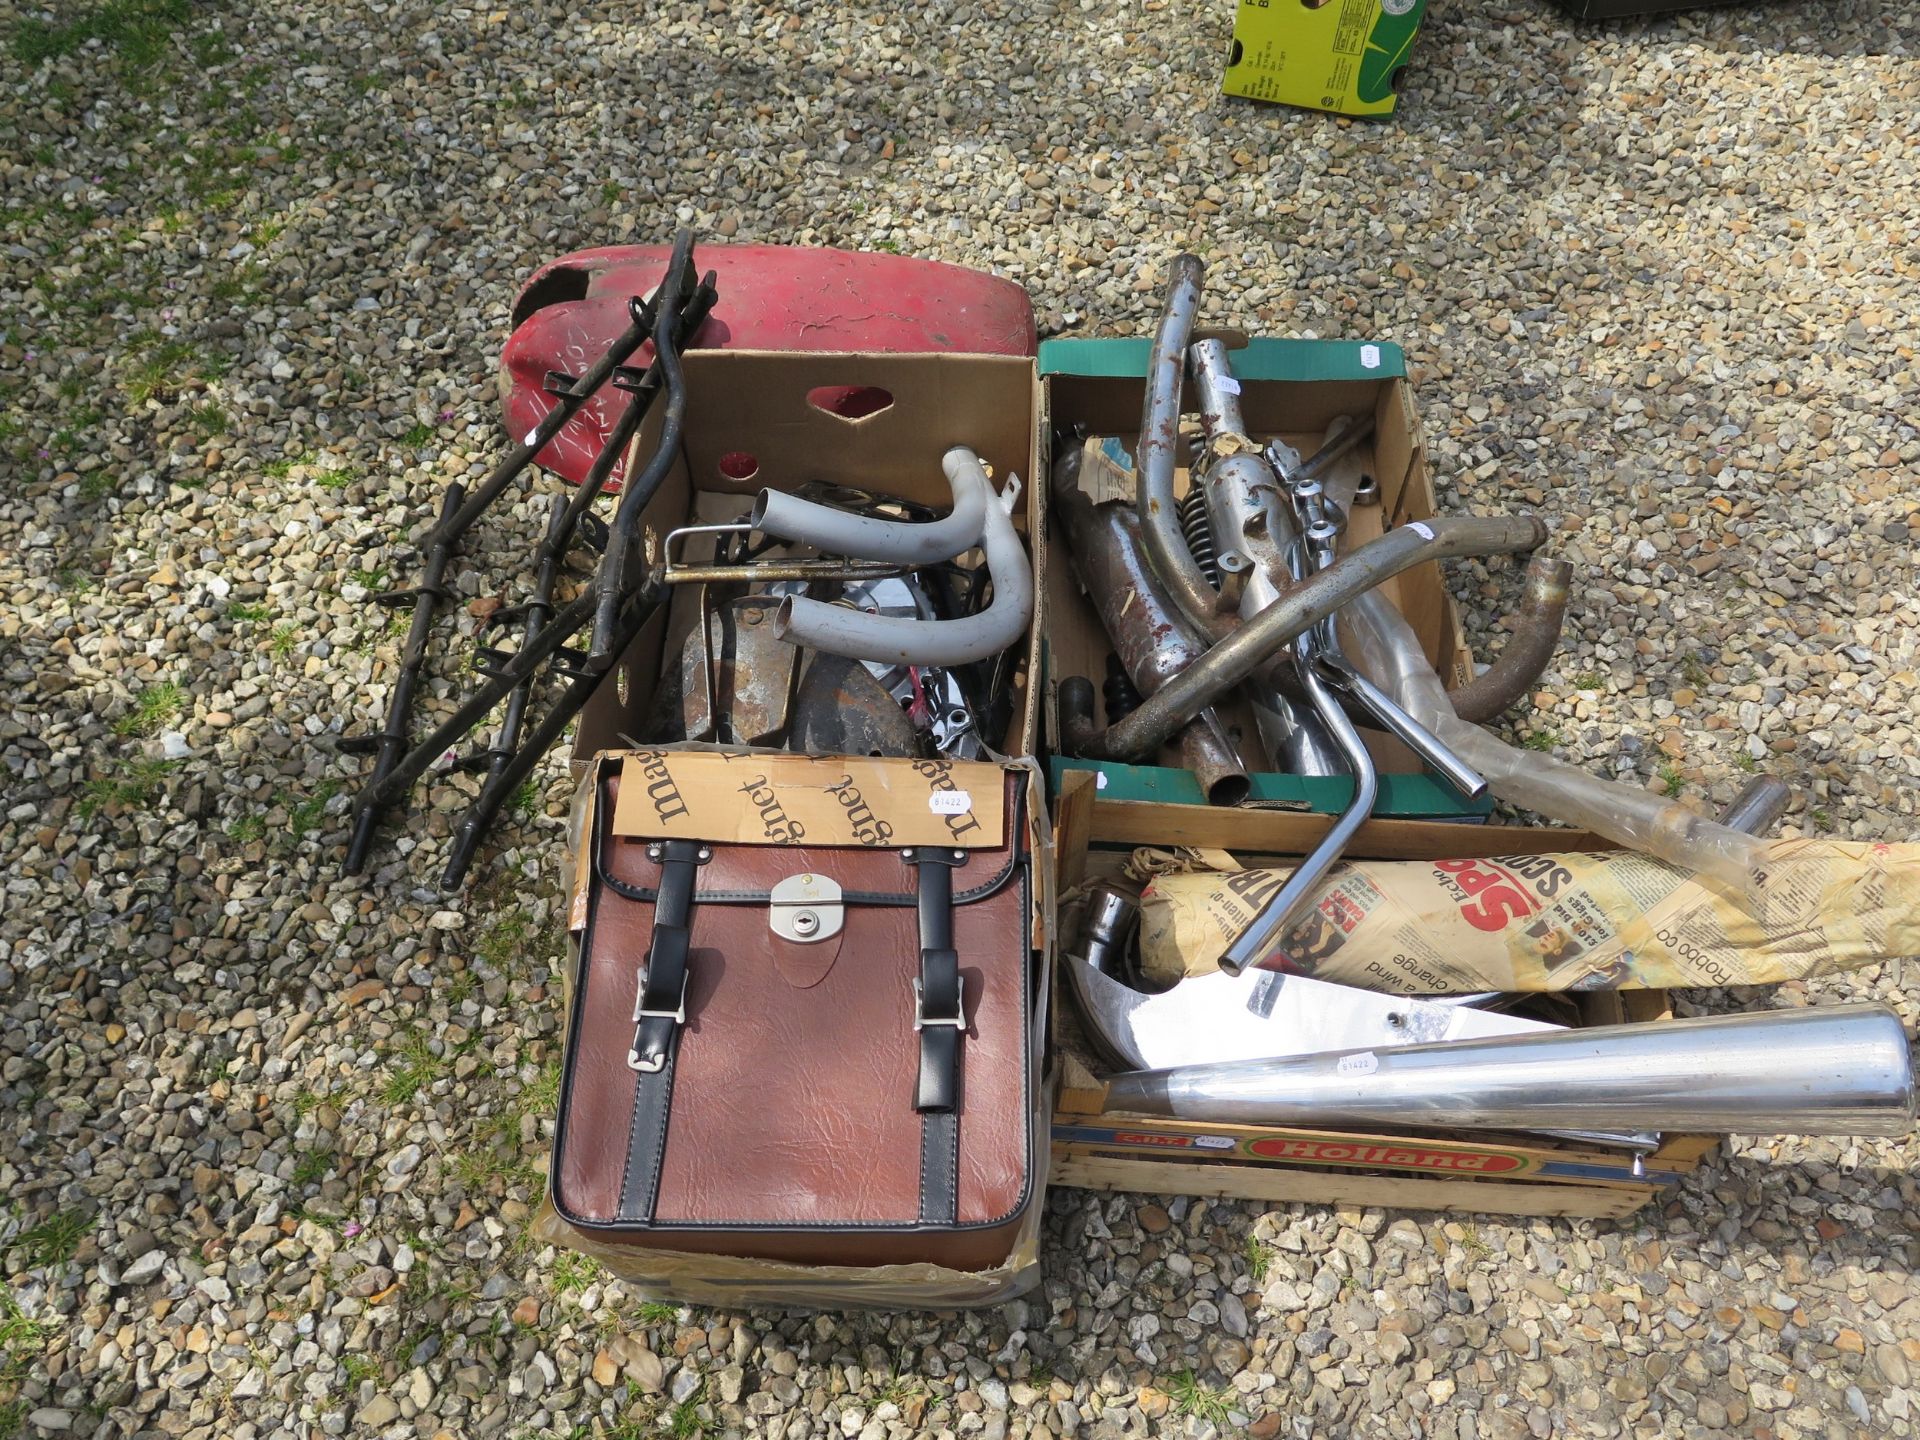 Assorted leather panniers, exhausts, handlebars and items Being sold without reserve